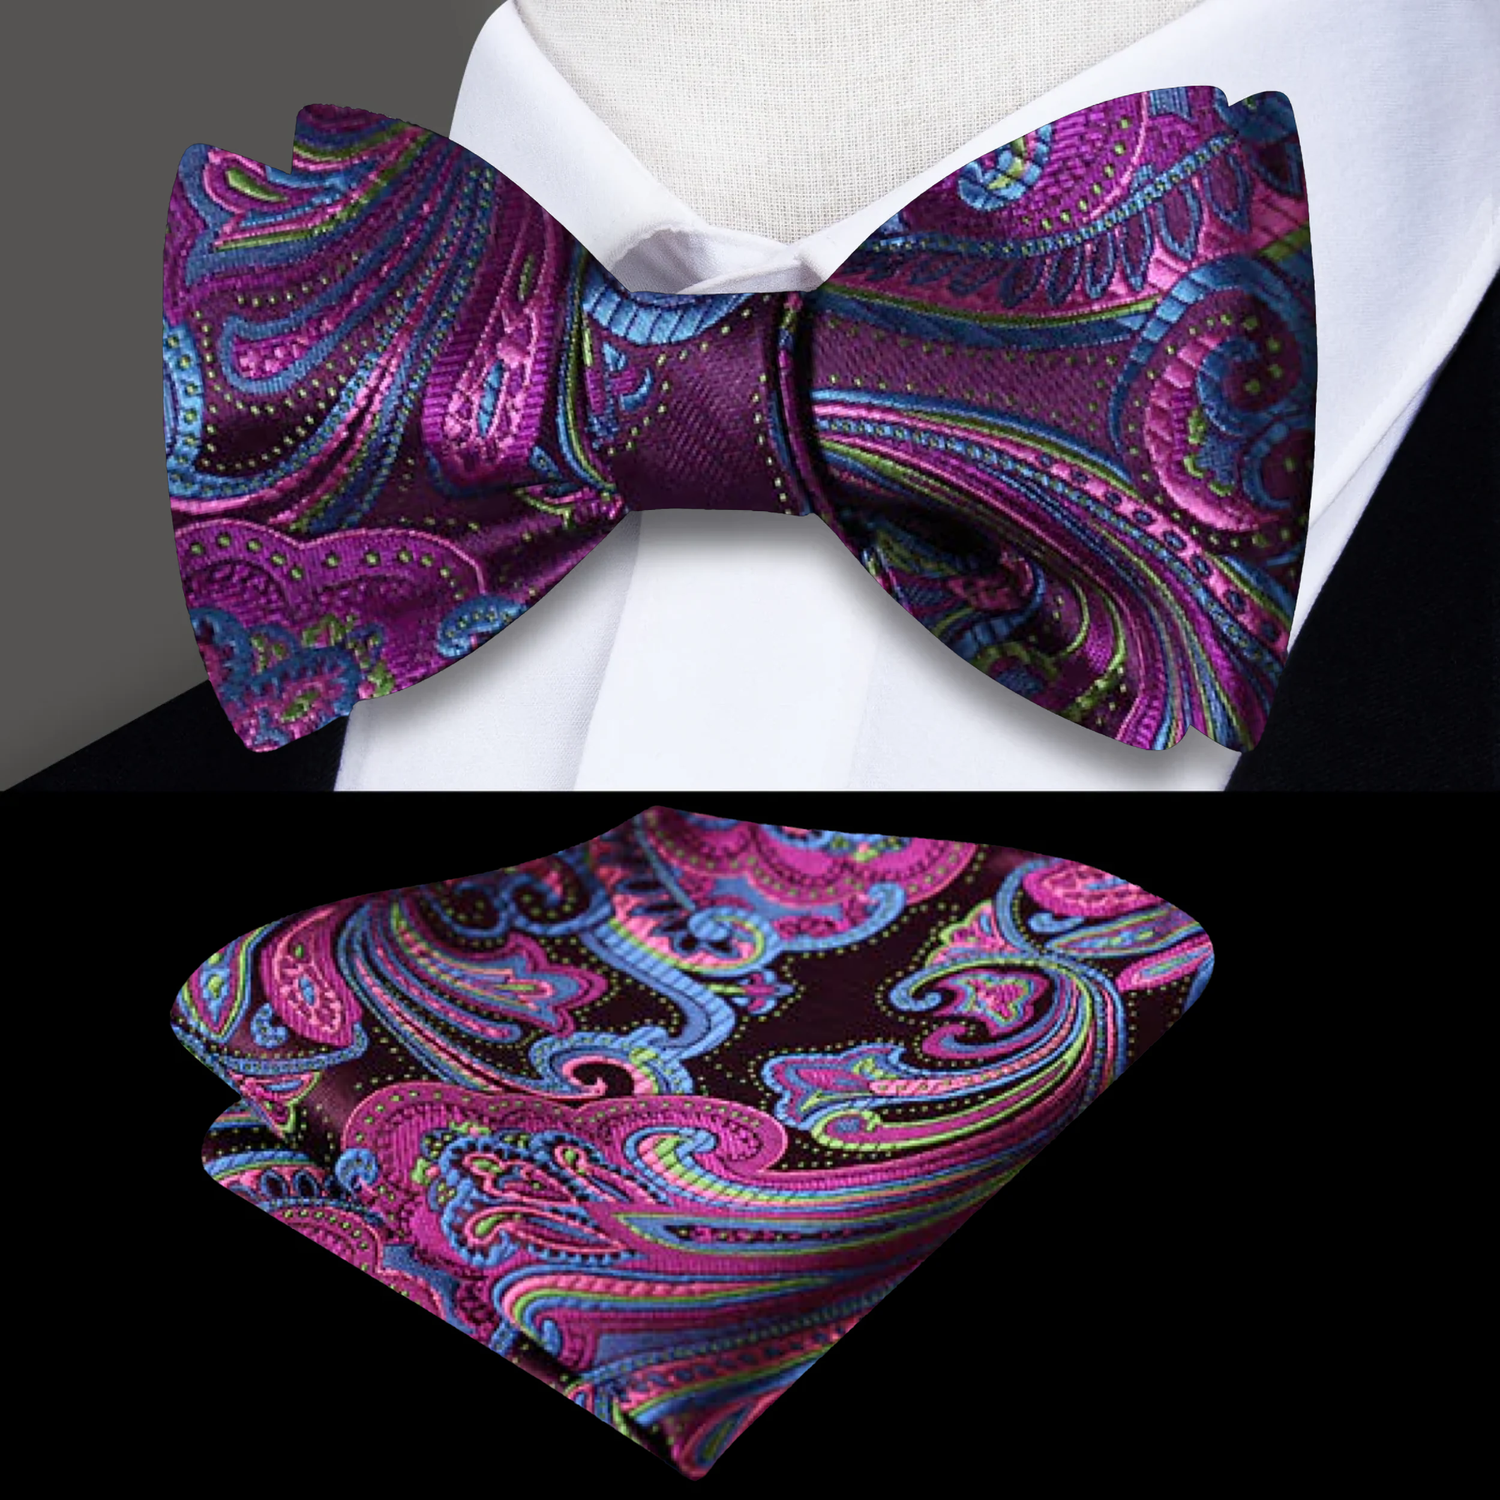 A Purple, Light Blue Intricate Floral with Paisley Pattern Silk Self Tie Bow Tie, Matching Pocket Square